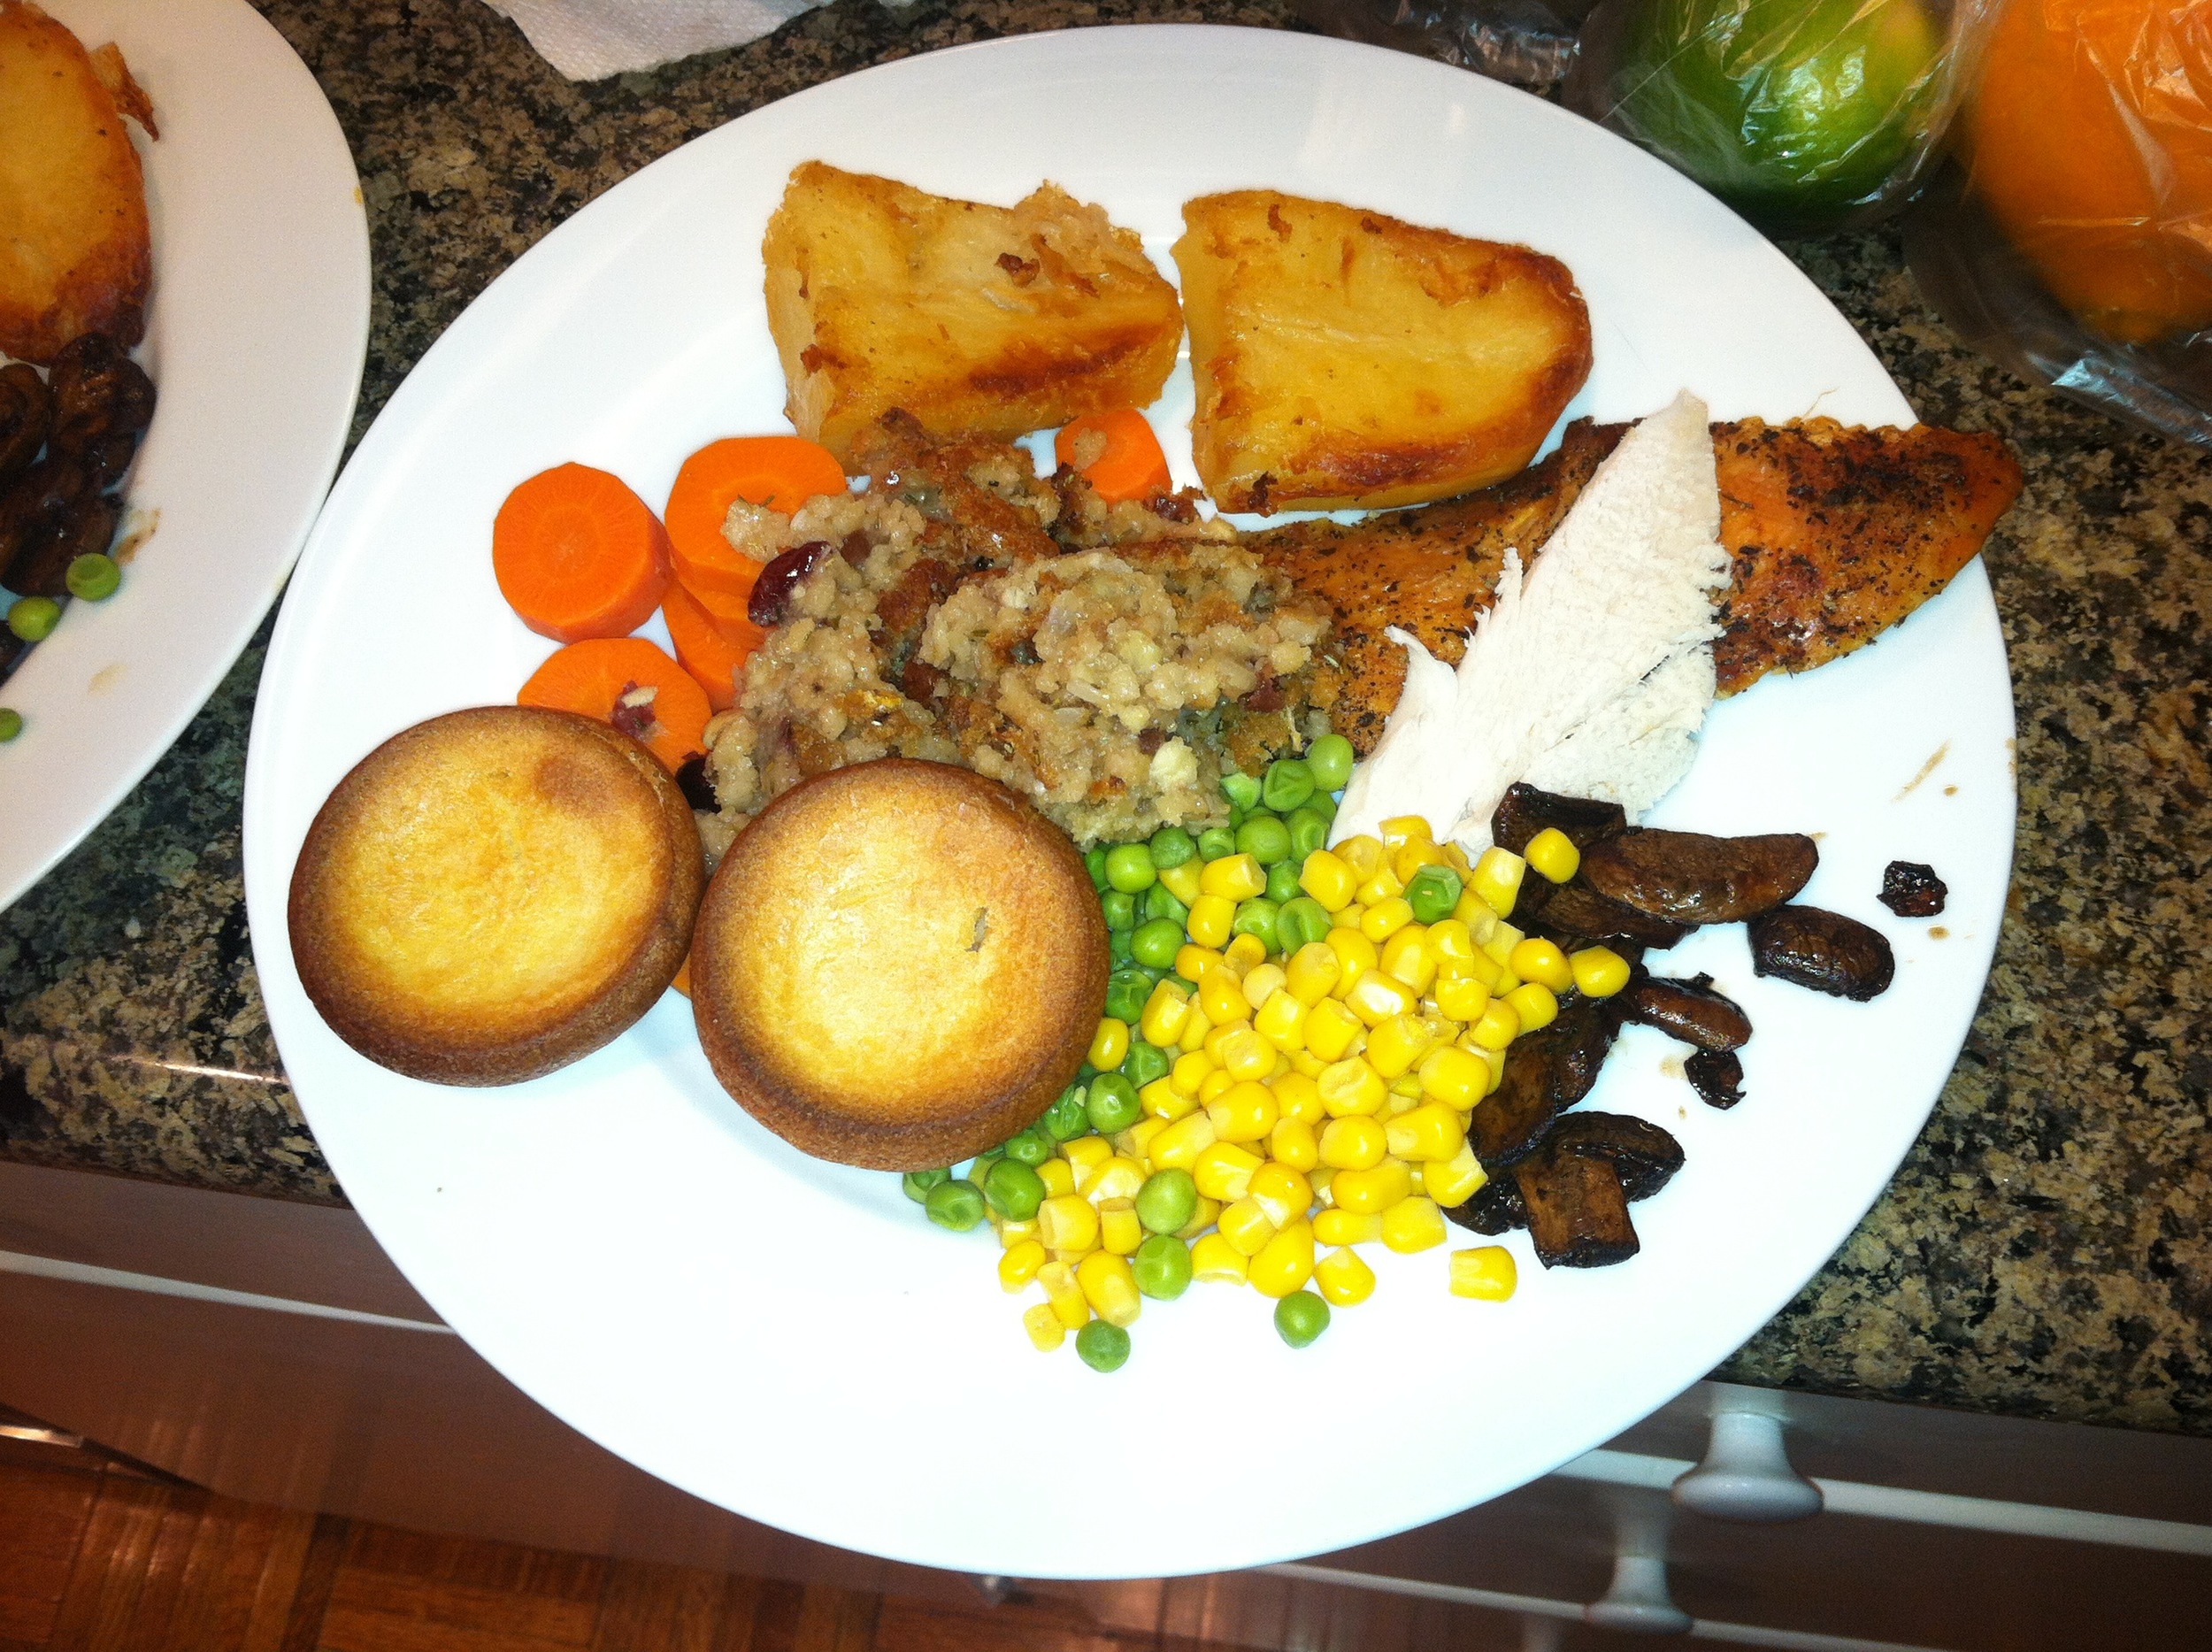  Christmas dinner- Turkey, Yorkshire pudding, sautéed mushrooms, roasted potatoes, carrots, peas, stuffing and corn. Not pictured- English sausages wrapped in bacon. 